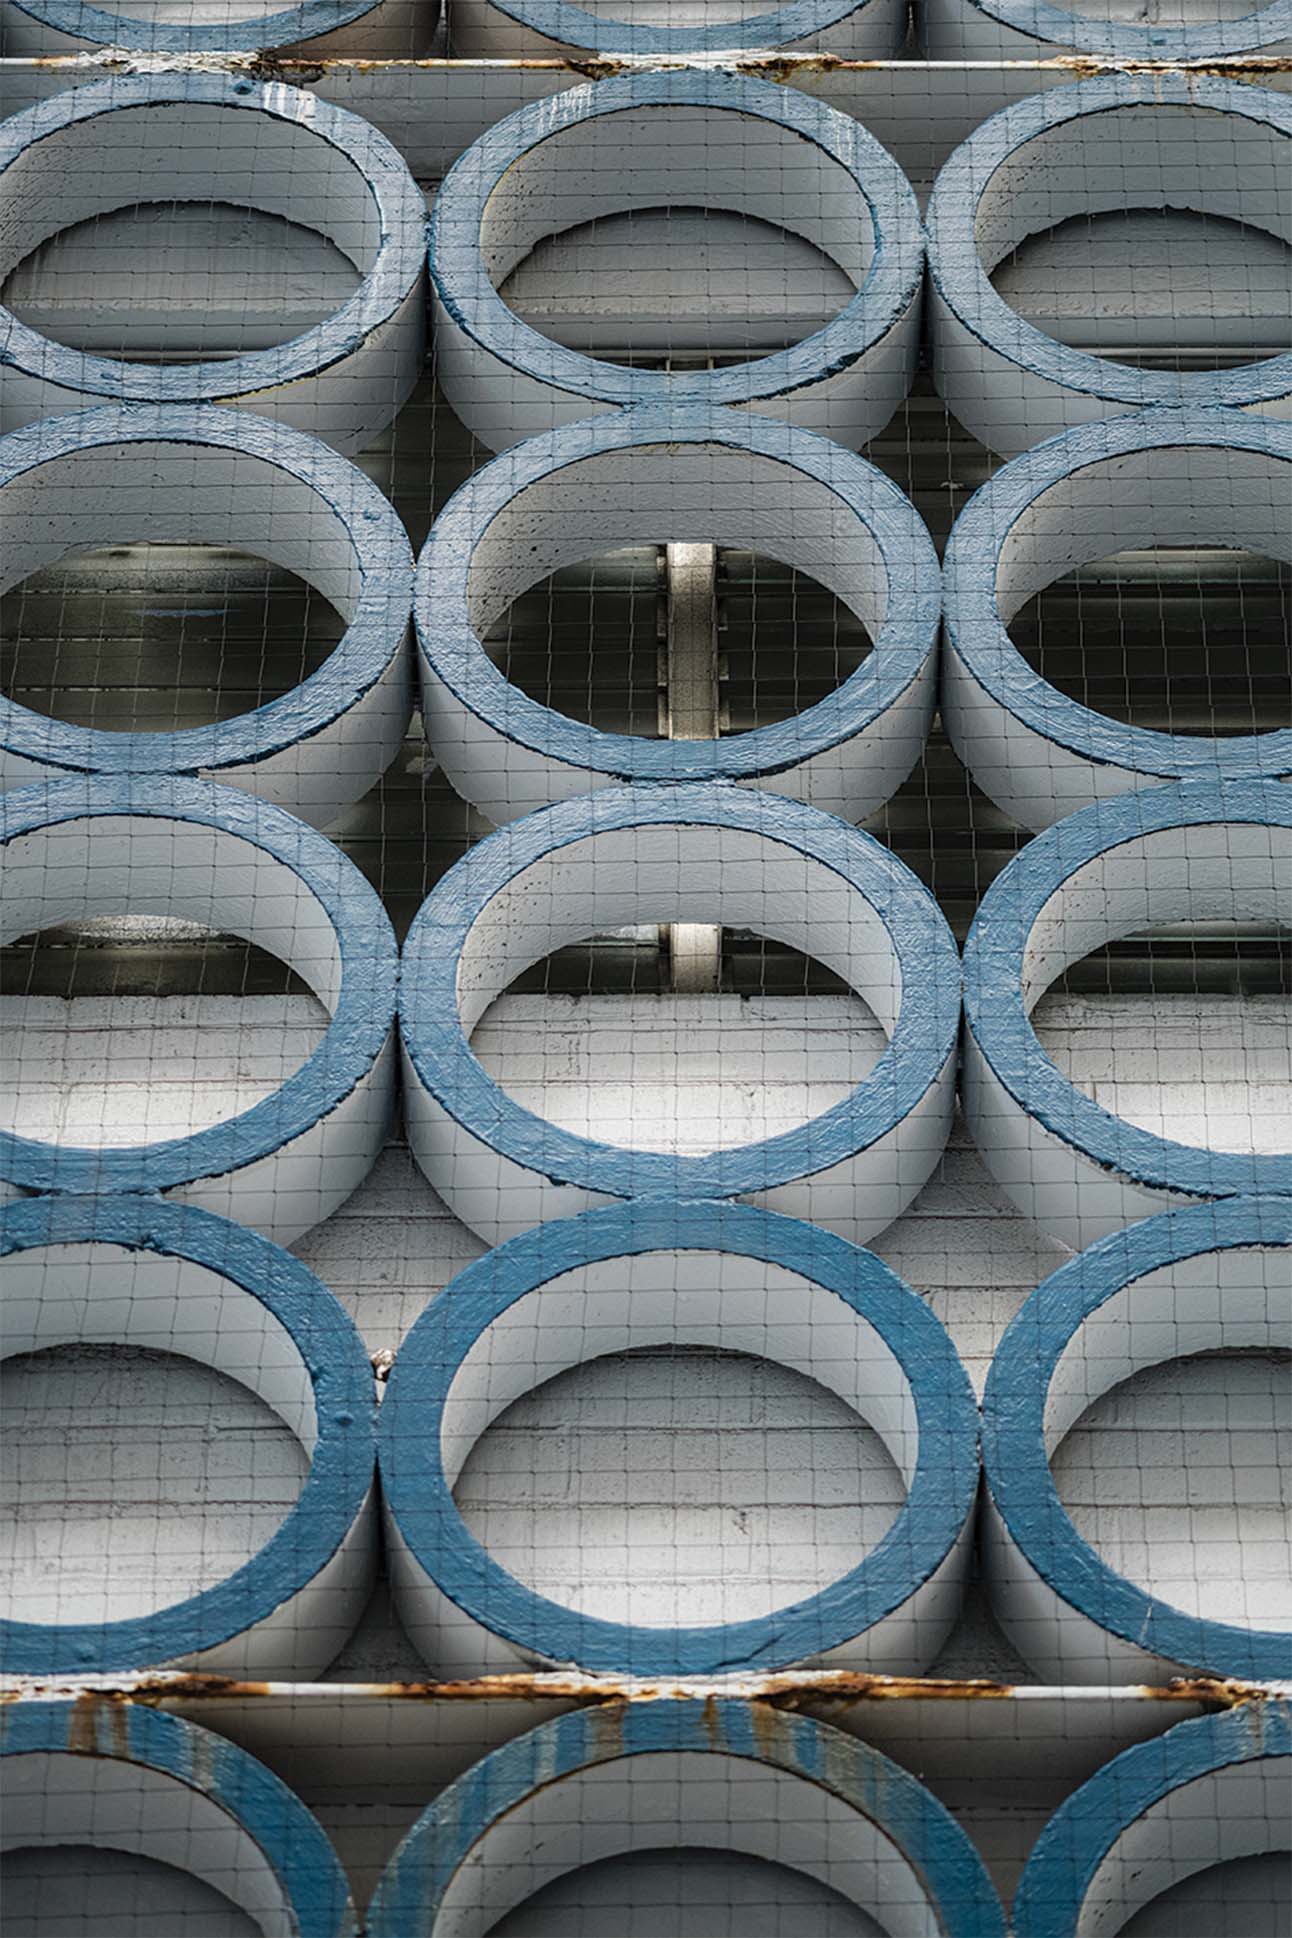 a group of blue and white circular objects